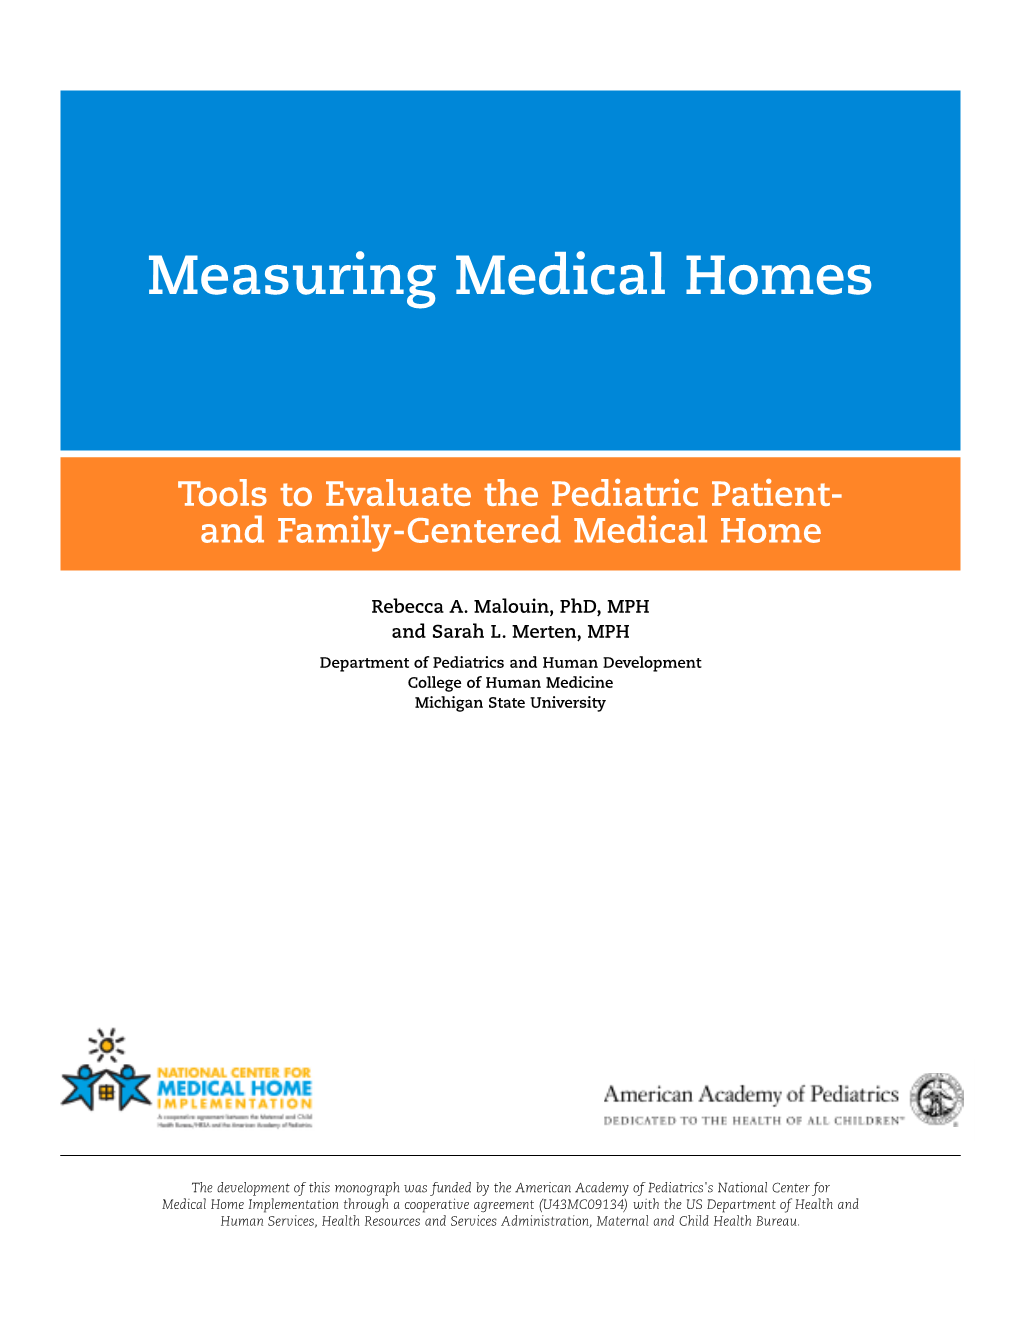 Measuring Medical Homes: Tools to Evaluate the Pediatric Patient- and Family-Centered Medical Home